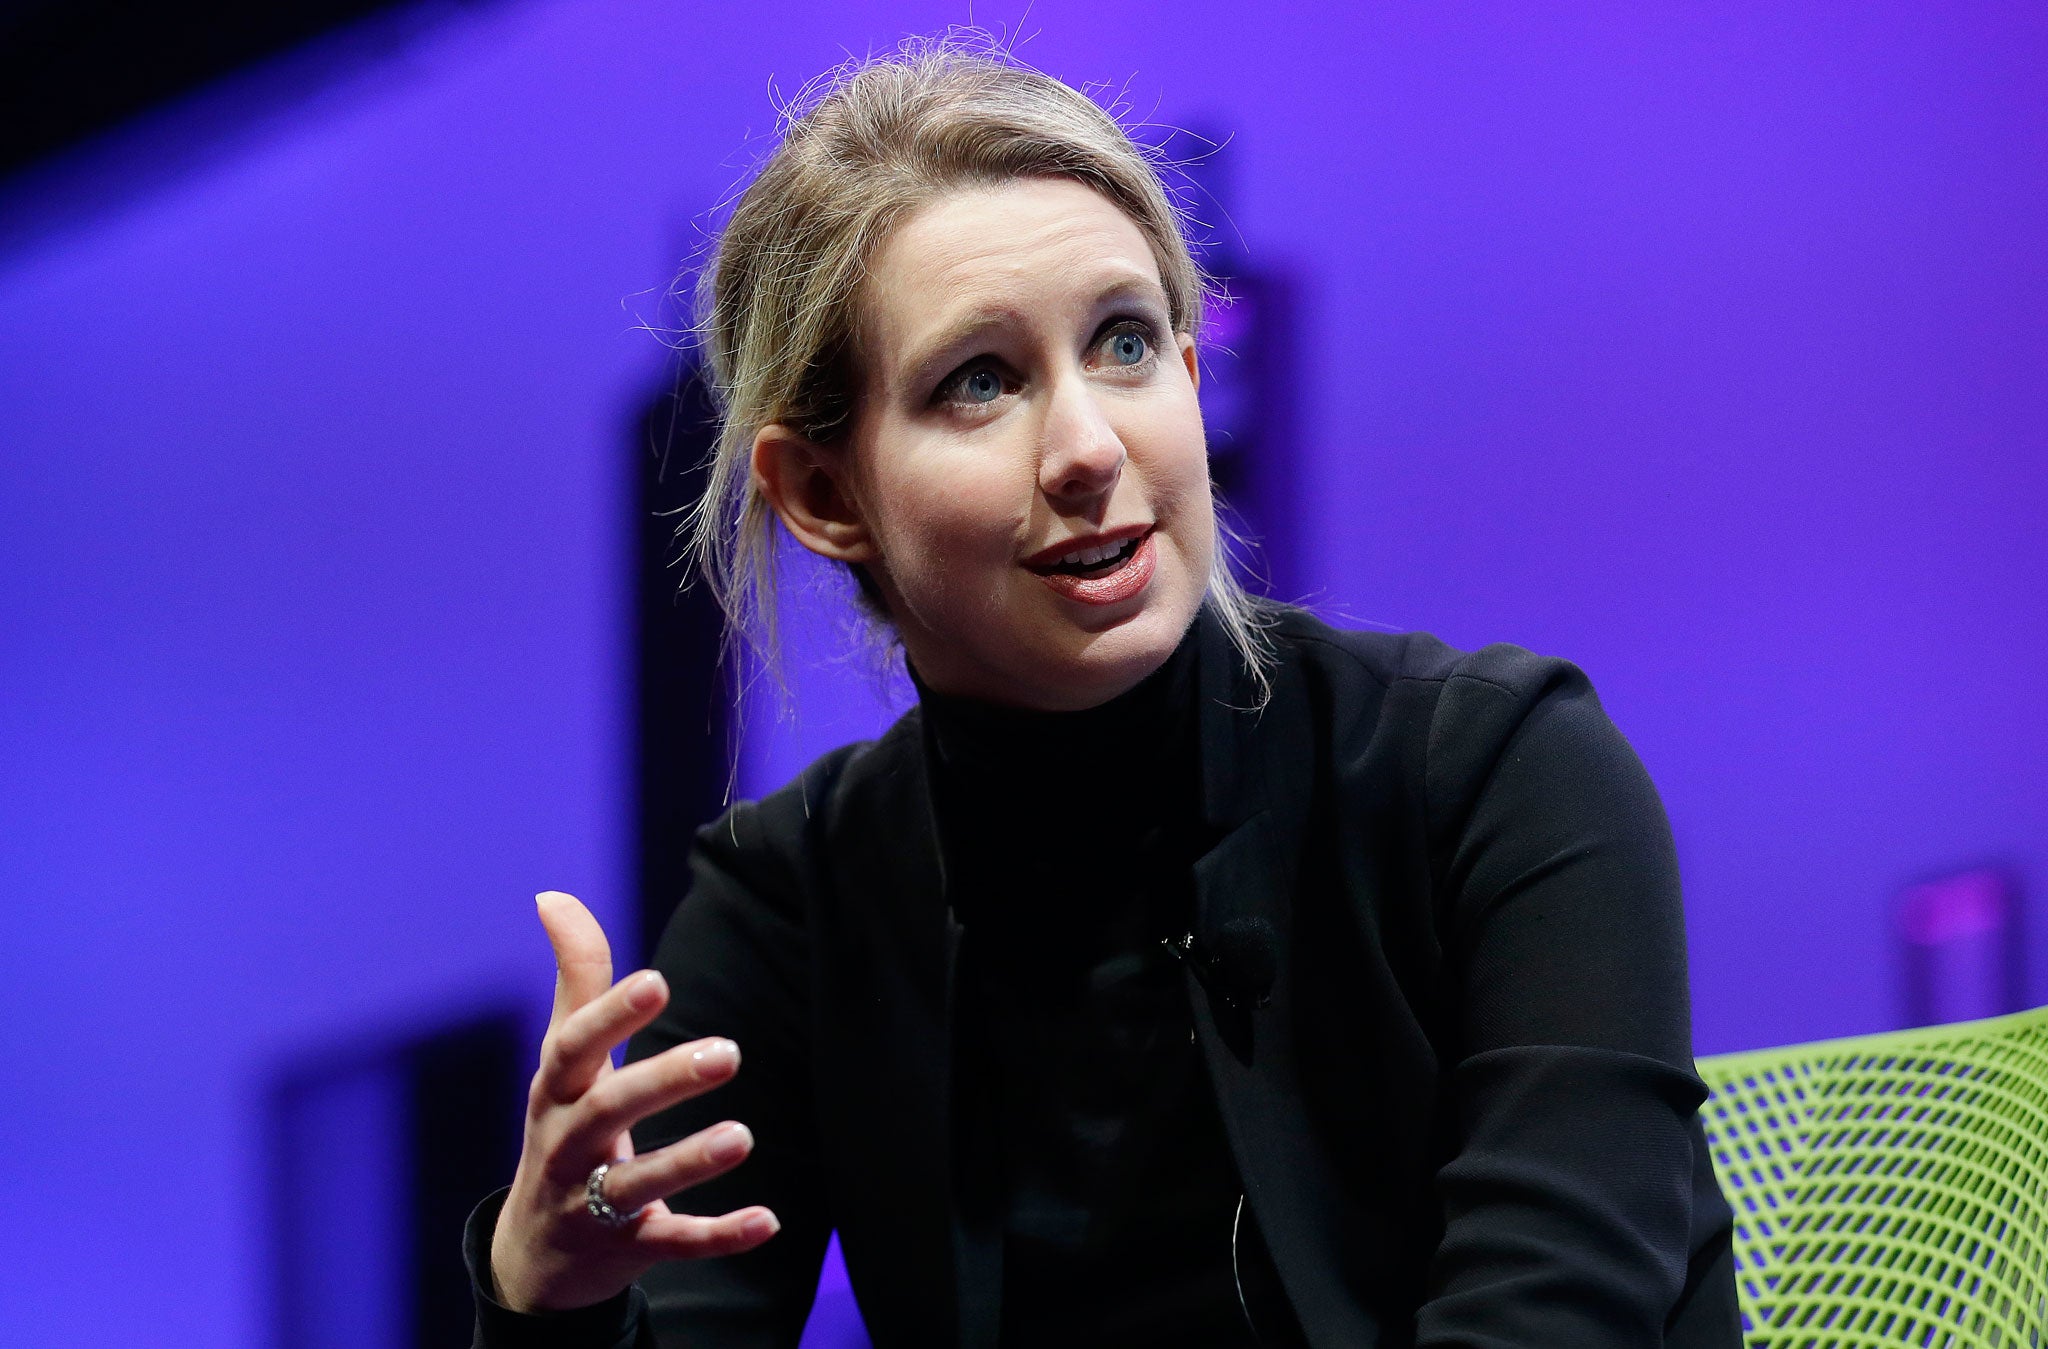 Elizabeth Holmes is the founder of Theranos, with a paper fortune of $4.5bn